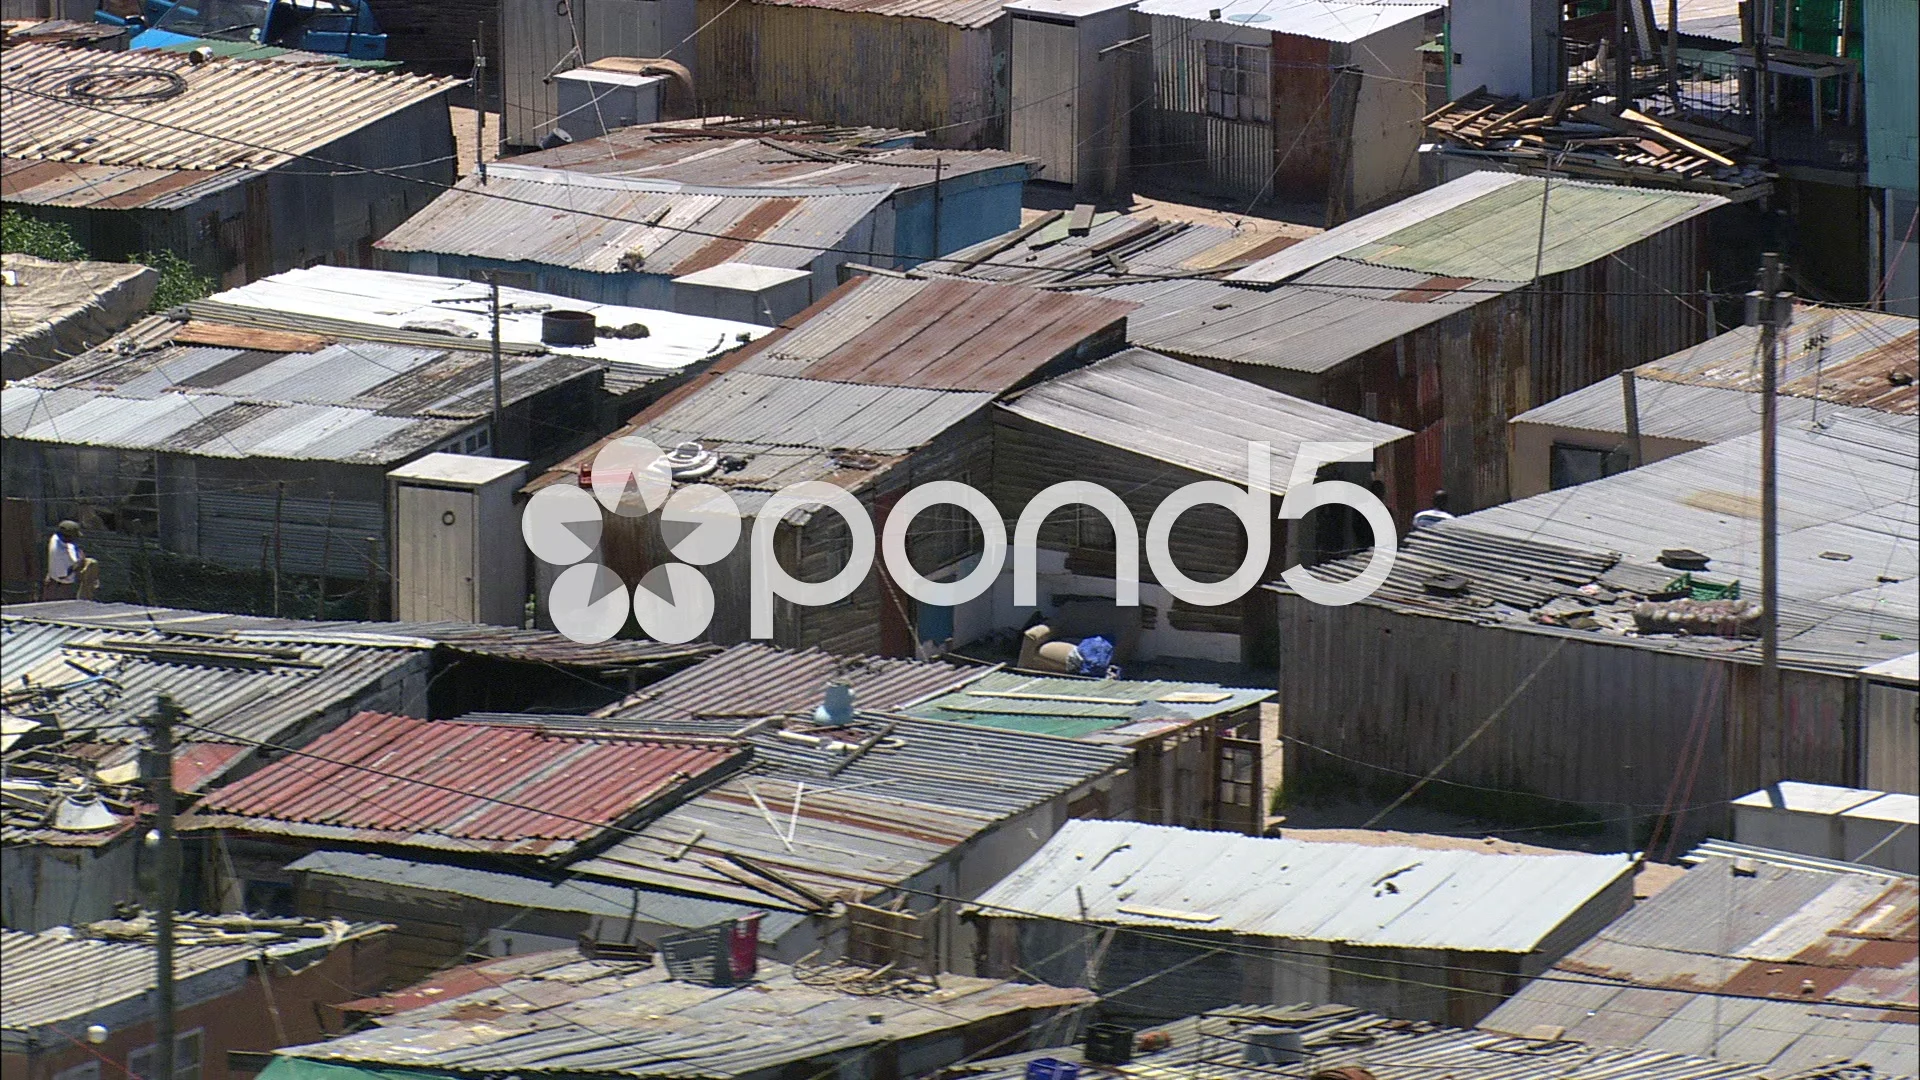 South Africa Stock Footage Royalty Free Stock Videos Pond5 Images, Photos, Reviews